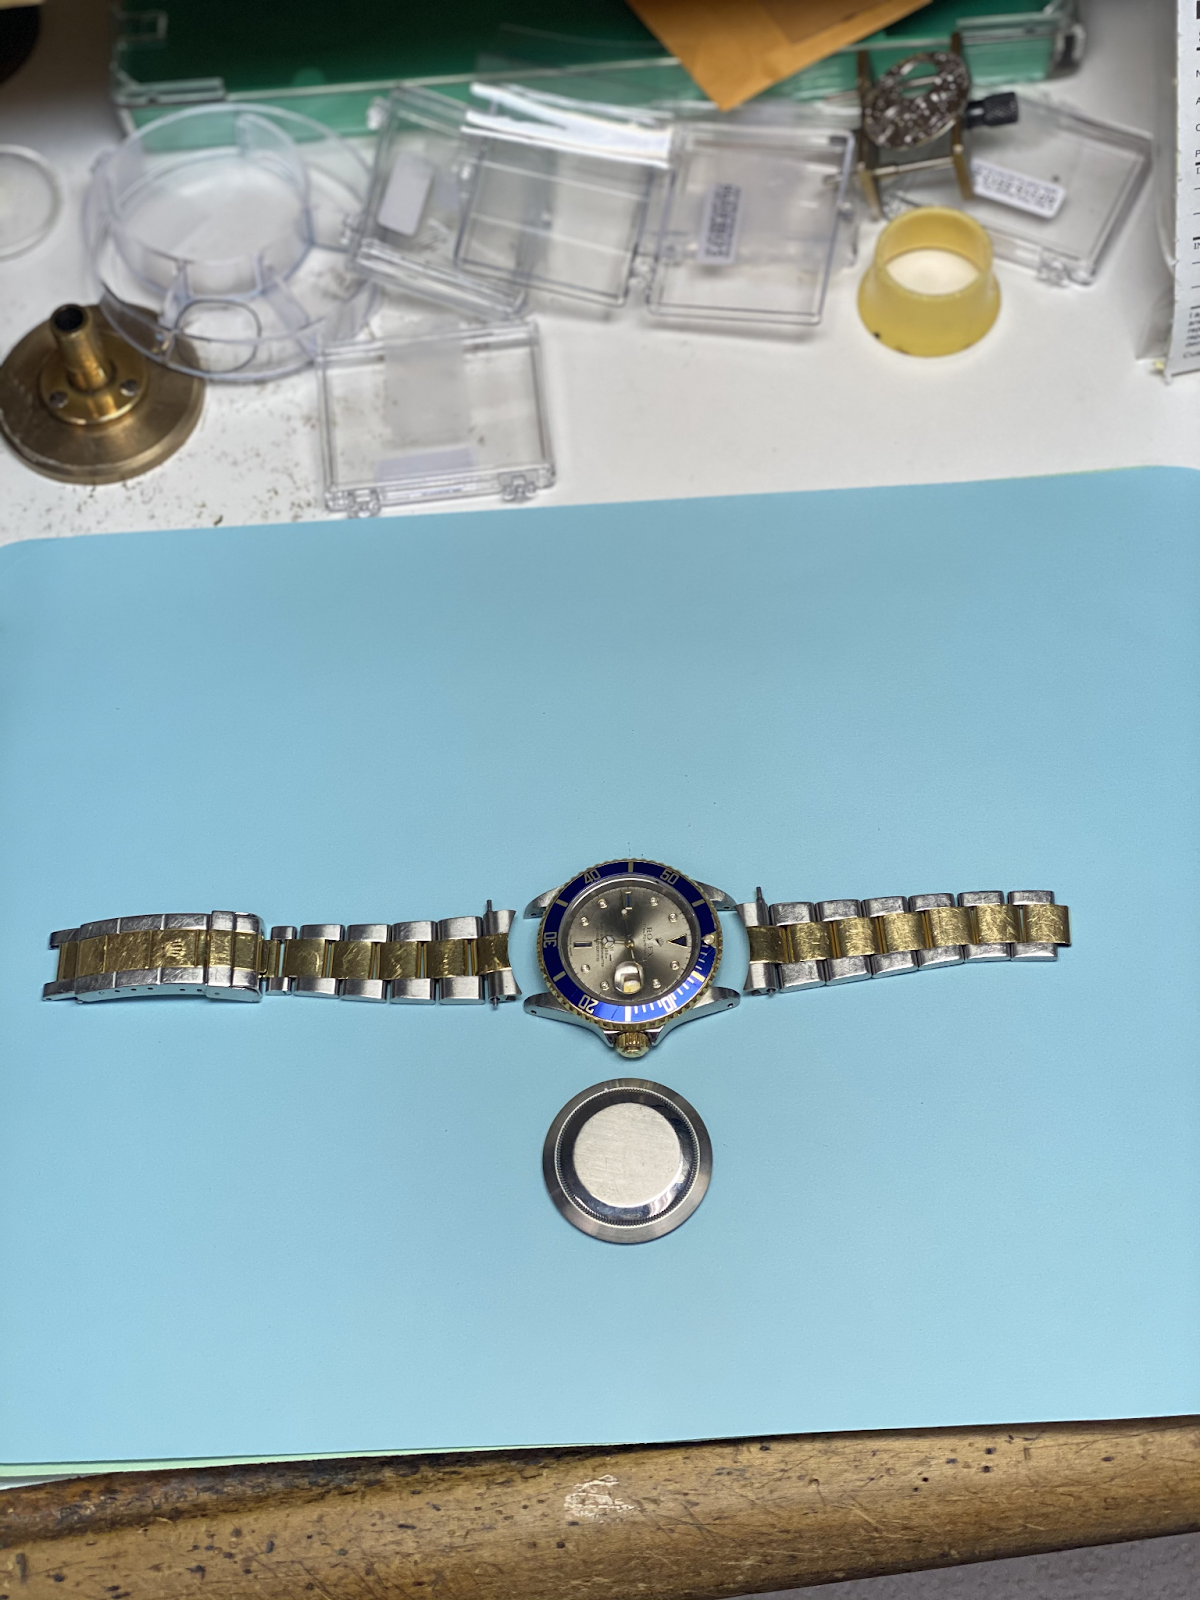 At Gray and Sons, we repair, restore, and bring watches back to prime condition.